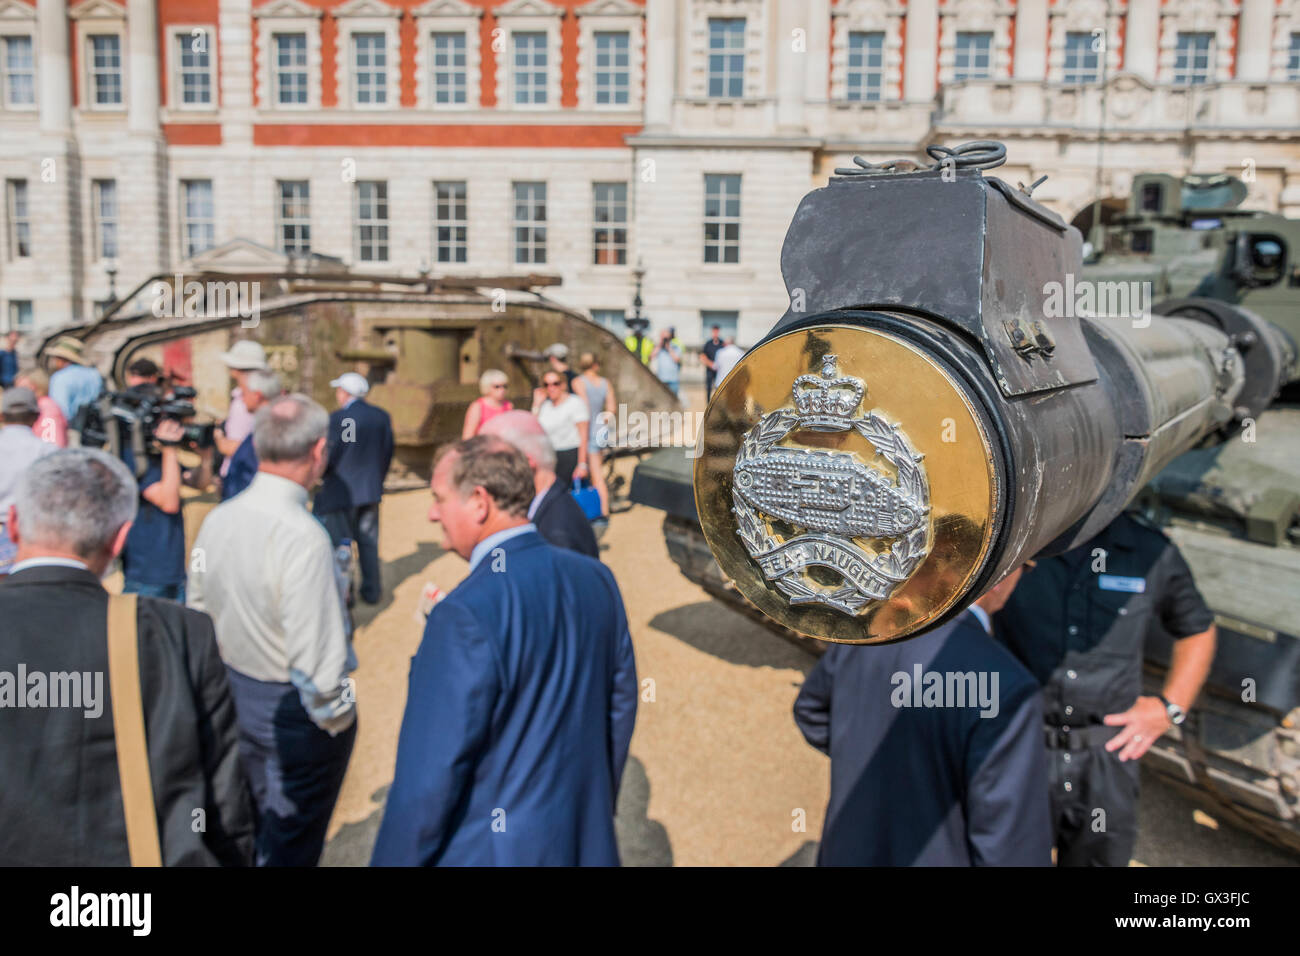 London, UK. 15th September, 2016. The tank arrives on Horse Guards Parade  where tourists take selfies and it  meets its contemporary sister, a Challenger tank of the Royal Tank Regiment (the end of its barrel with regimental crest in the foreground) - A replica of a World War One tank brought to London to mark the 100th anniversary its first use in action in the Battle of the Somme on 15 September 1916. Dorset's Tank Museum, provided the machine which was designed to travel at walking pace (3mph) to support the infantry. Credit:  Guy Bell/Alamy Live News Stock Photo